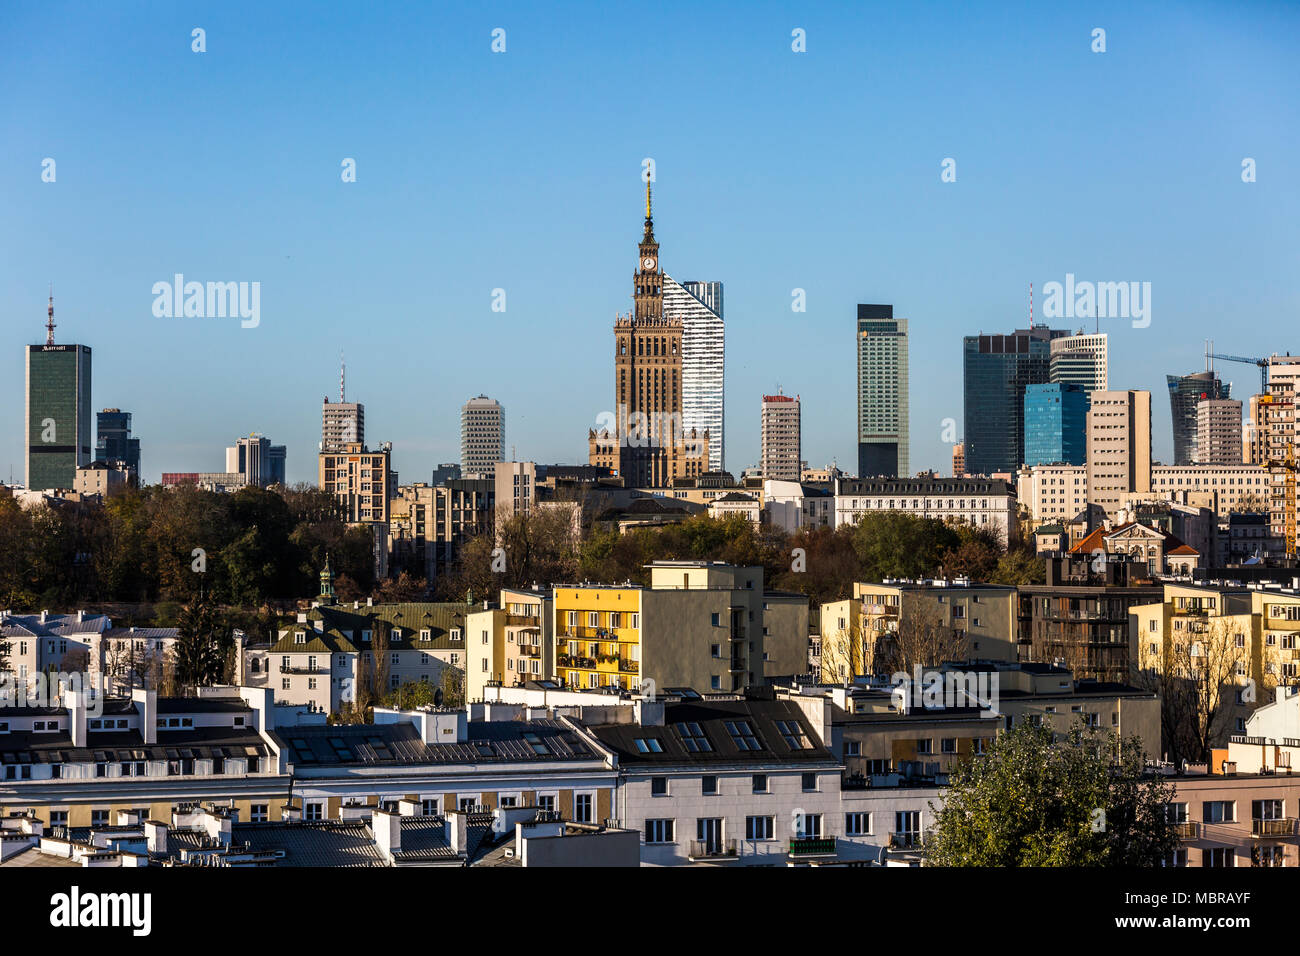 City view, skyscrapers in the city center, in the center of the Palace of Culture and Science, Pałac Kultury i Nauki,Warsaw Stock Photo